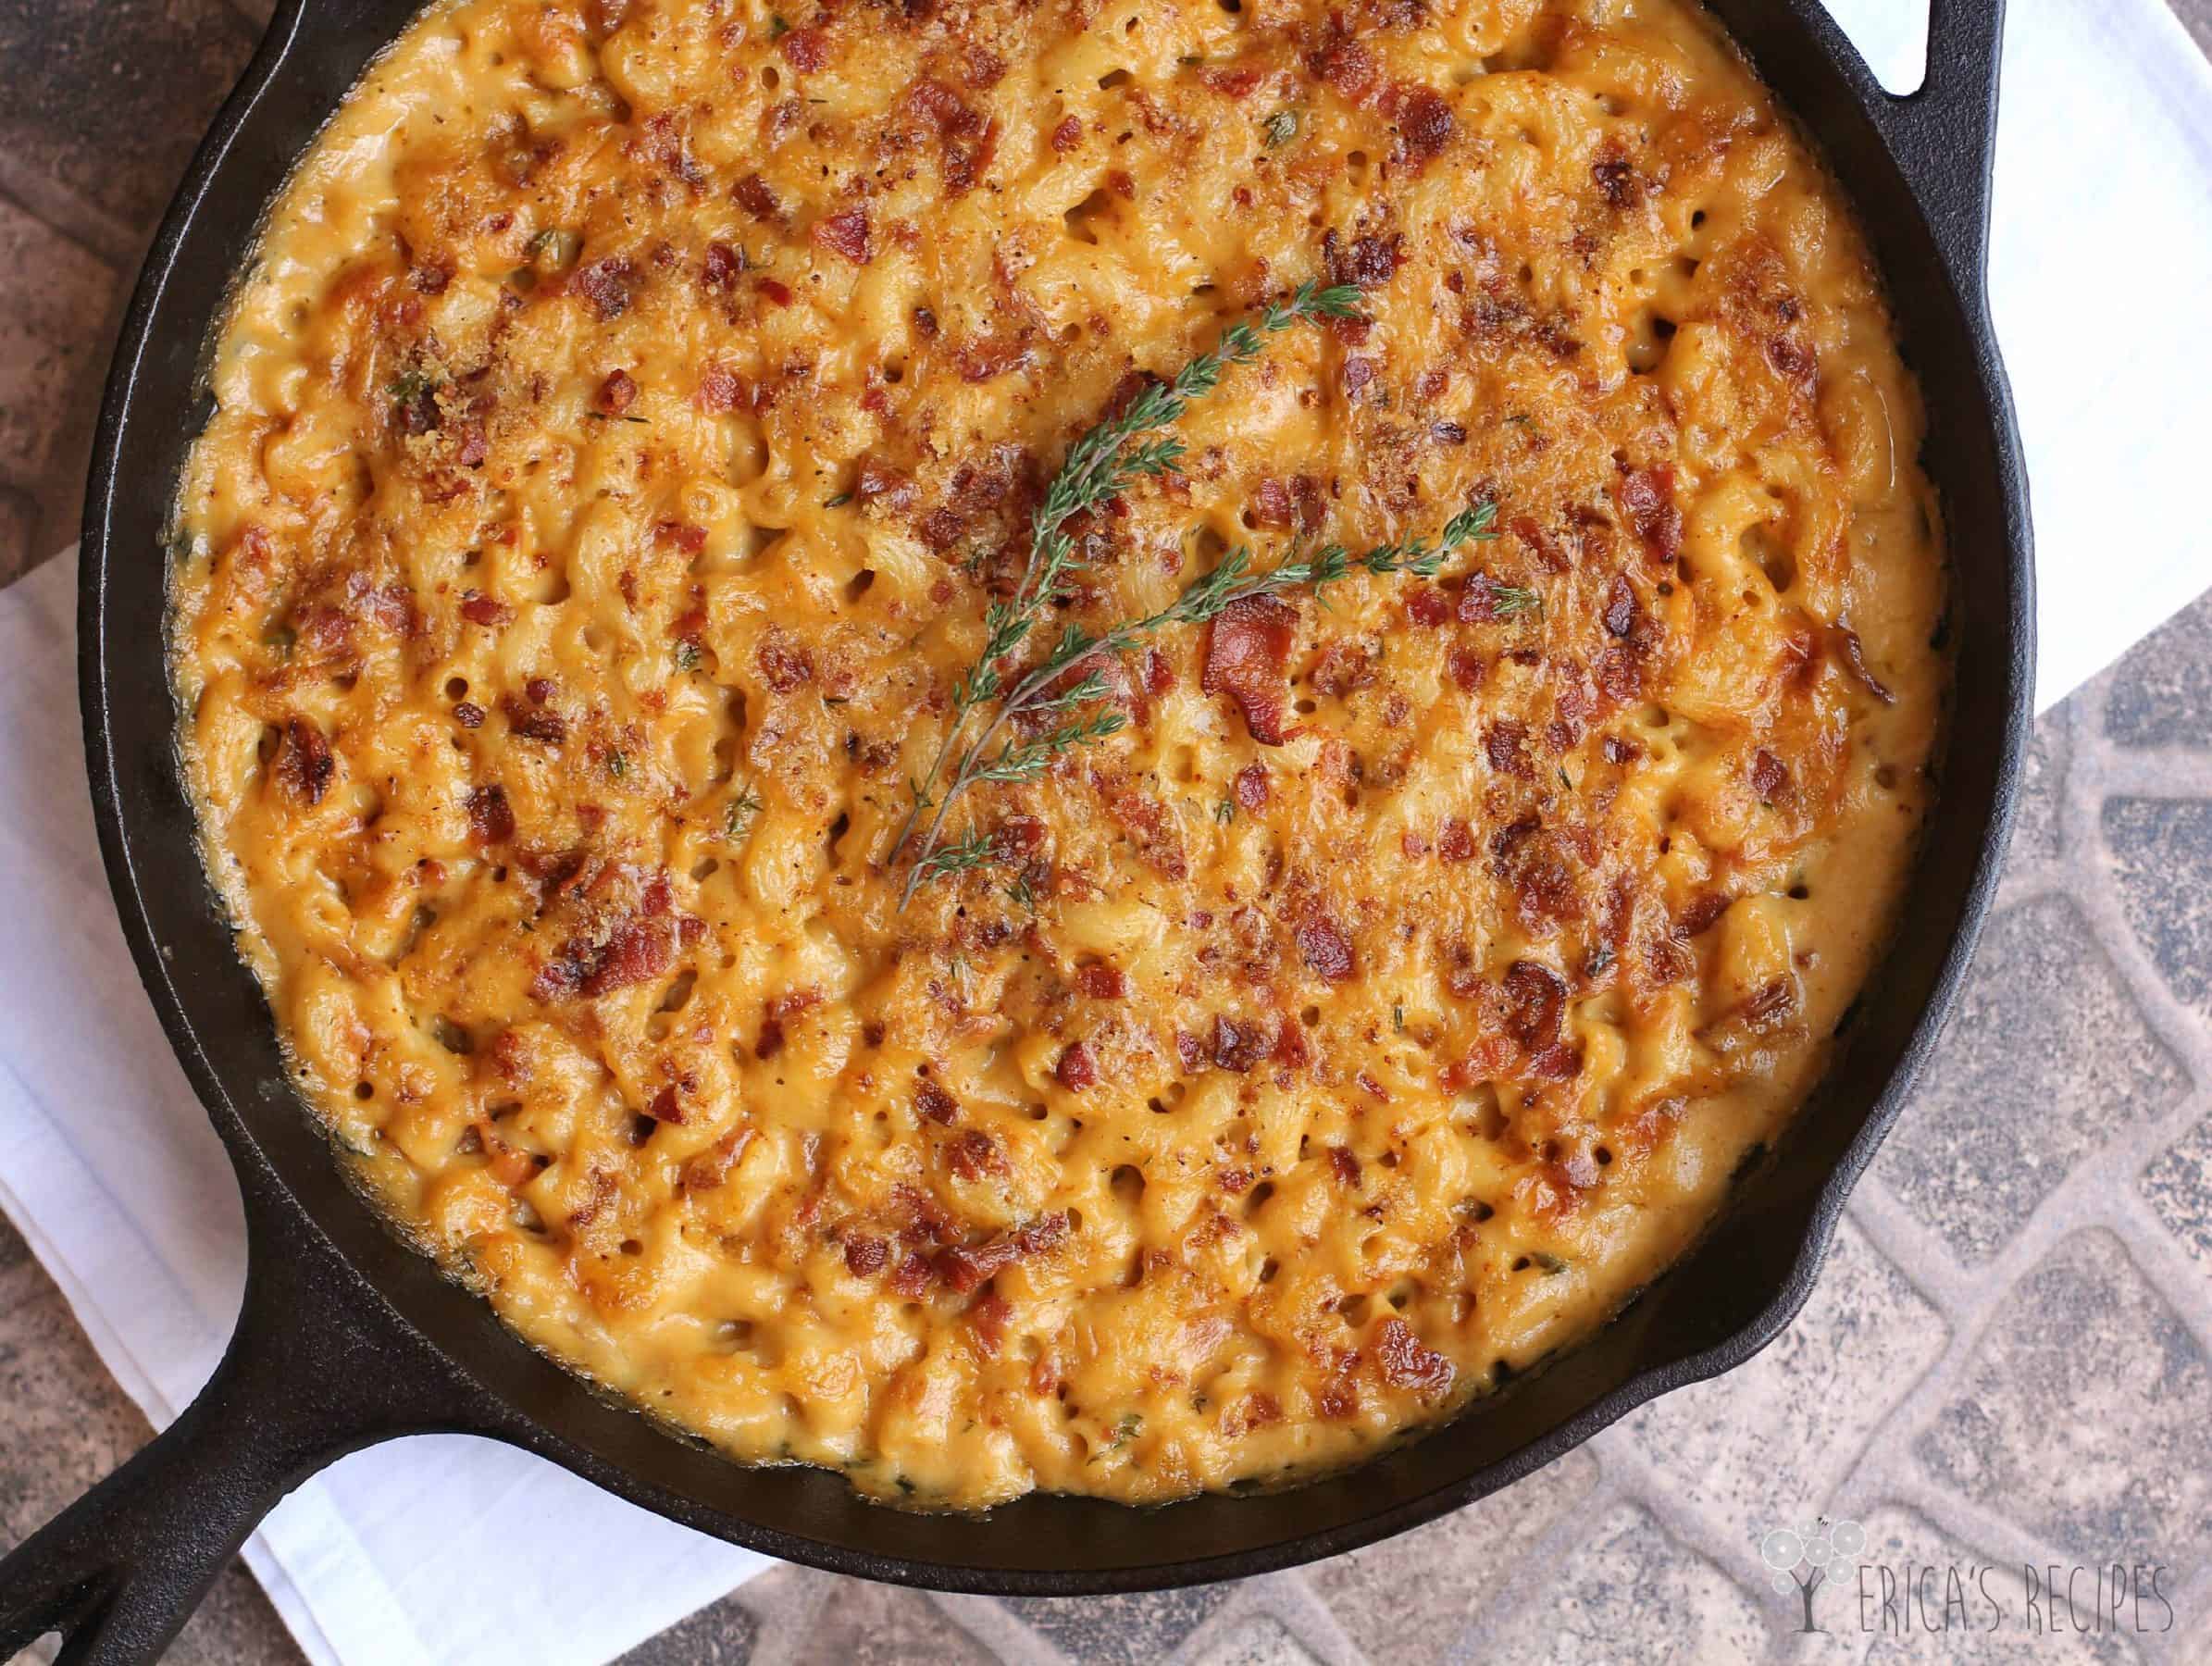 Garlic, Bacon, and Beer Macaroni and Cheese | EricasRecipes.com